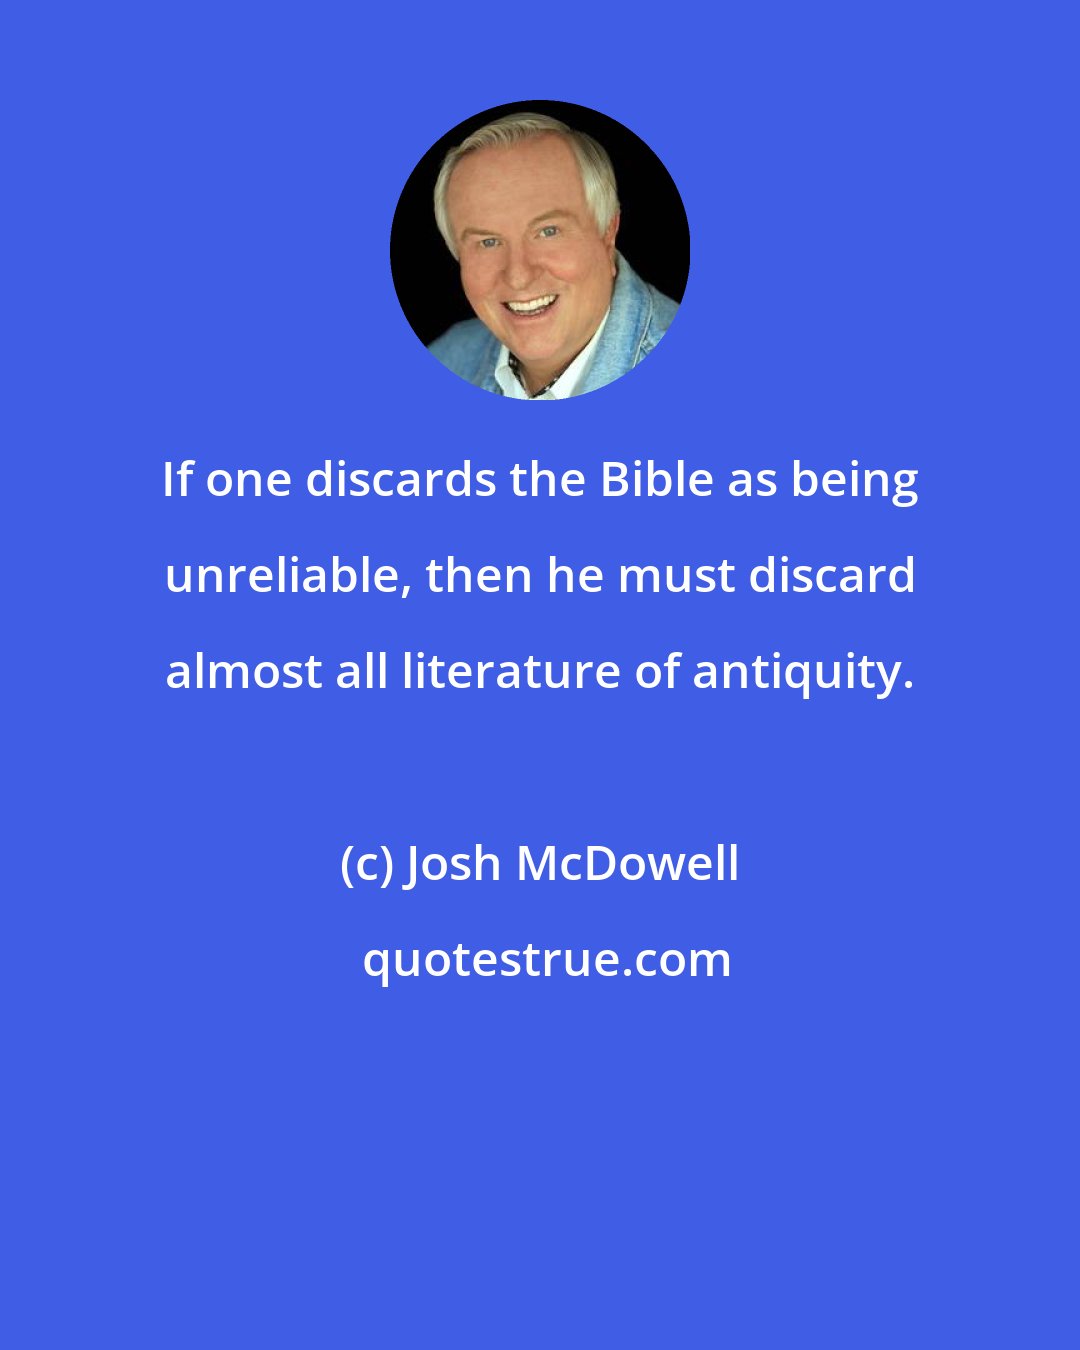 Josh McDowell: If one discards the Bible as being unreliable, then he must discard almost all literature of antiquity.